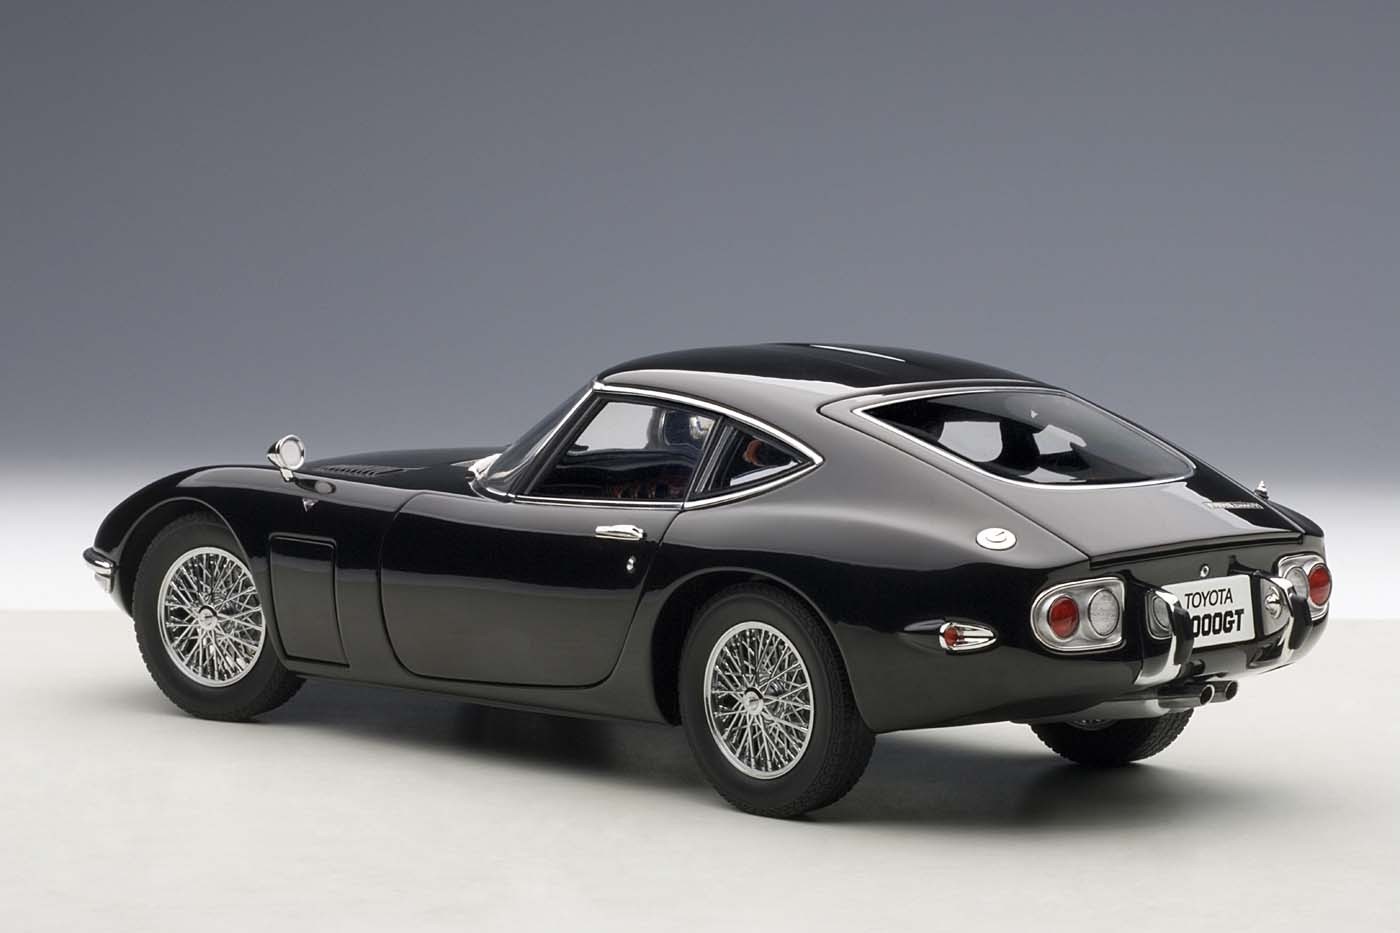 Toyota 2000 GT Upgraded Coupe Black 78750 AUTOart die-cast scale model 1:18